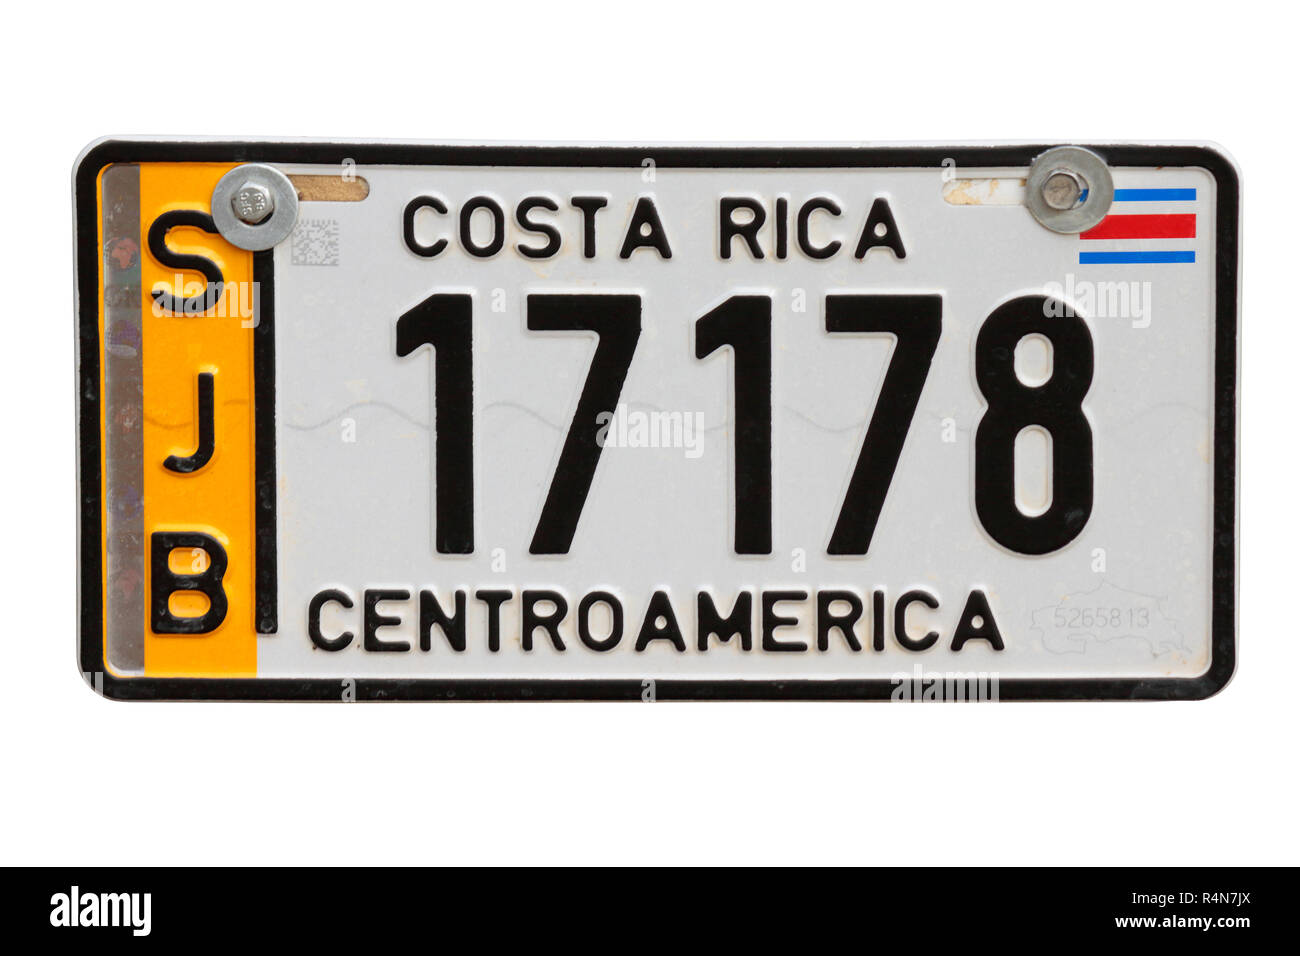 A Costa Rica Central America number plate - license plate - vehicle registration plate for buses, autobuses or coaches isolated on a white background Stock Photo